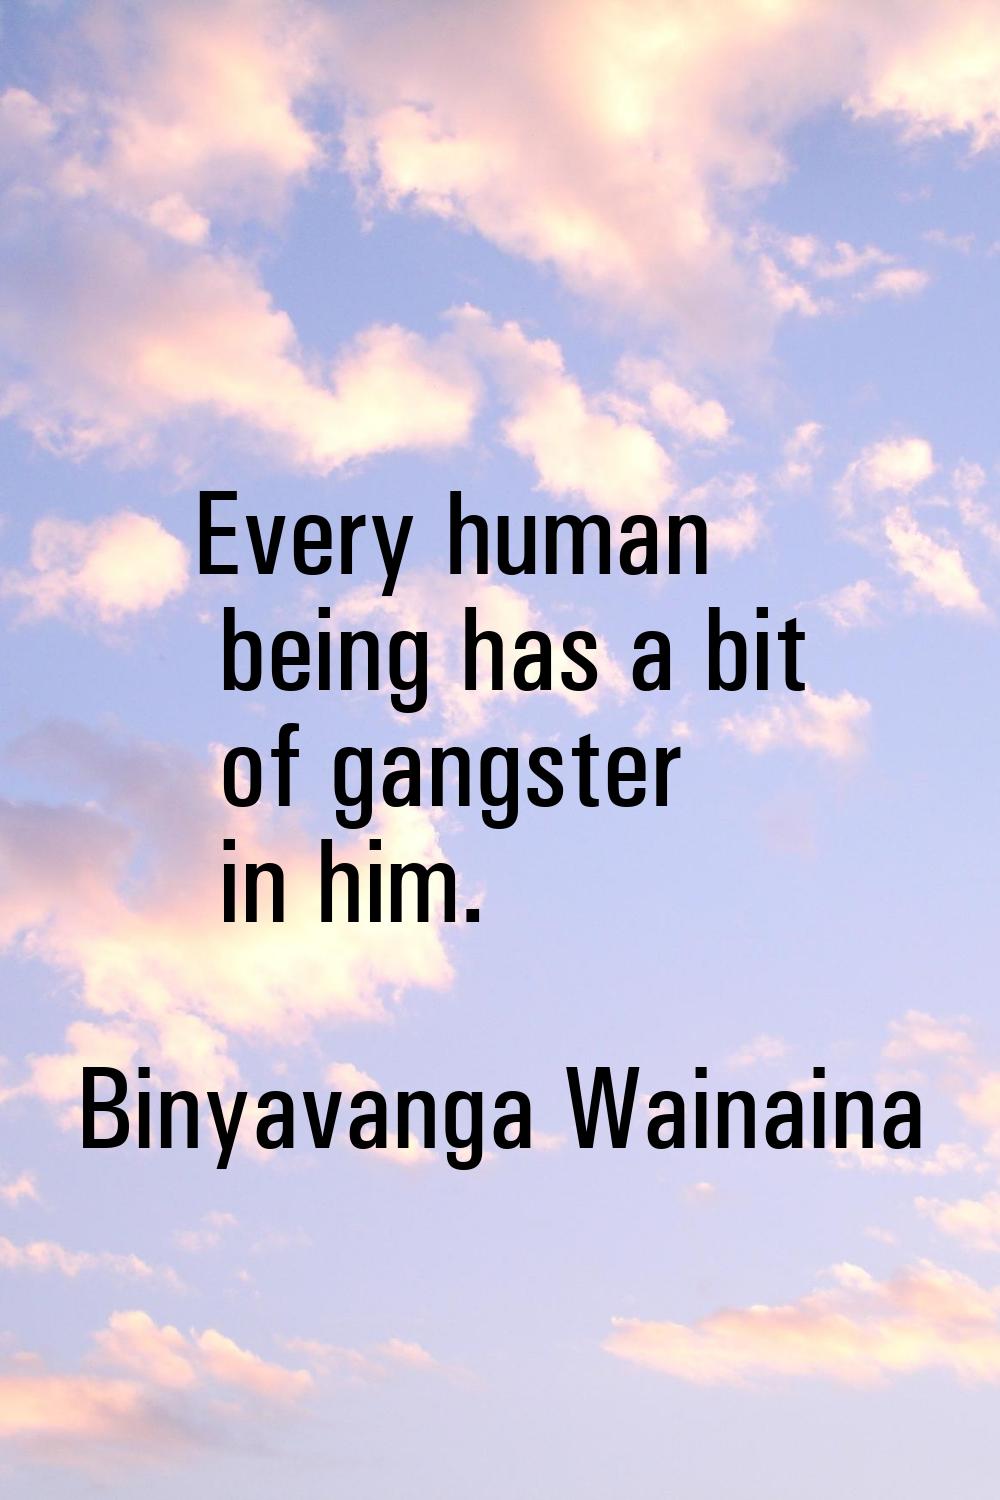 Every human being has a bit of gangster in him.